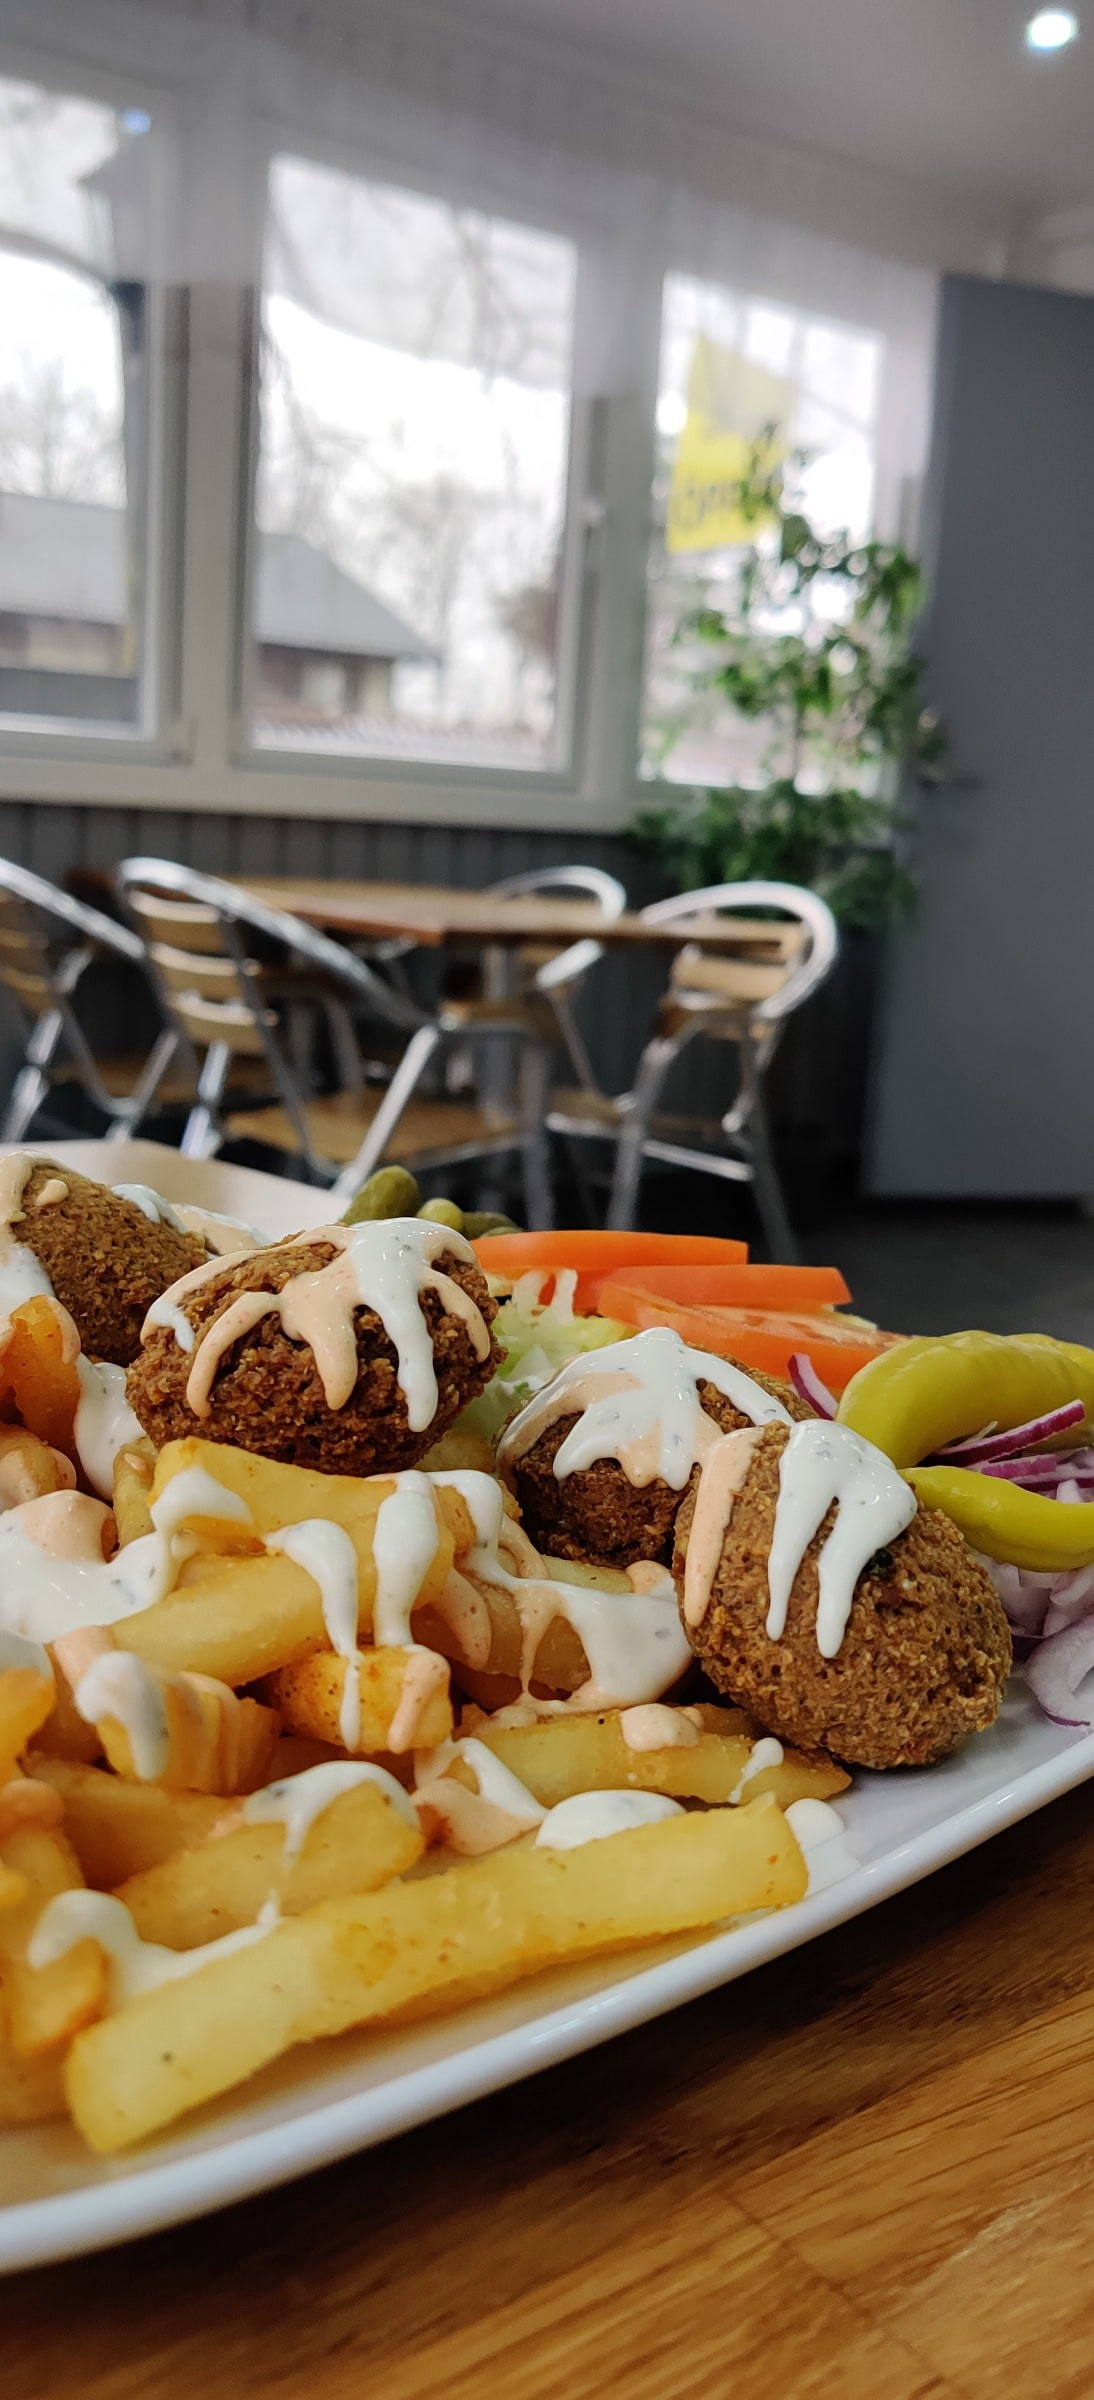 Falafel – Photo from Kebabland by Shahzad A. (11/03/2021)